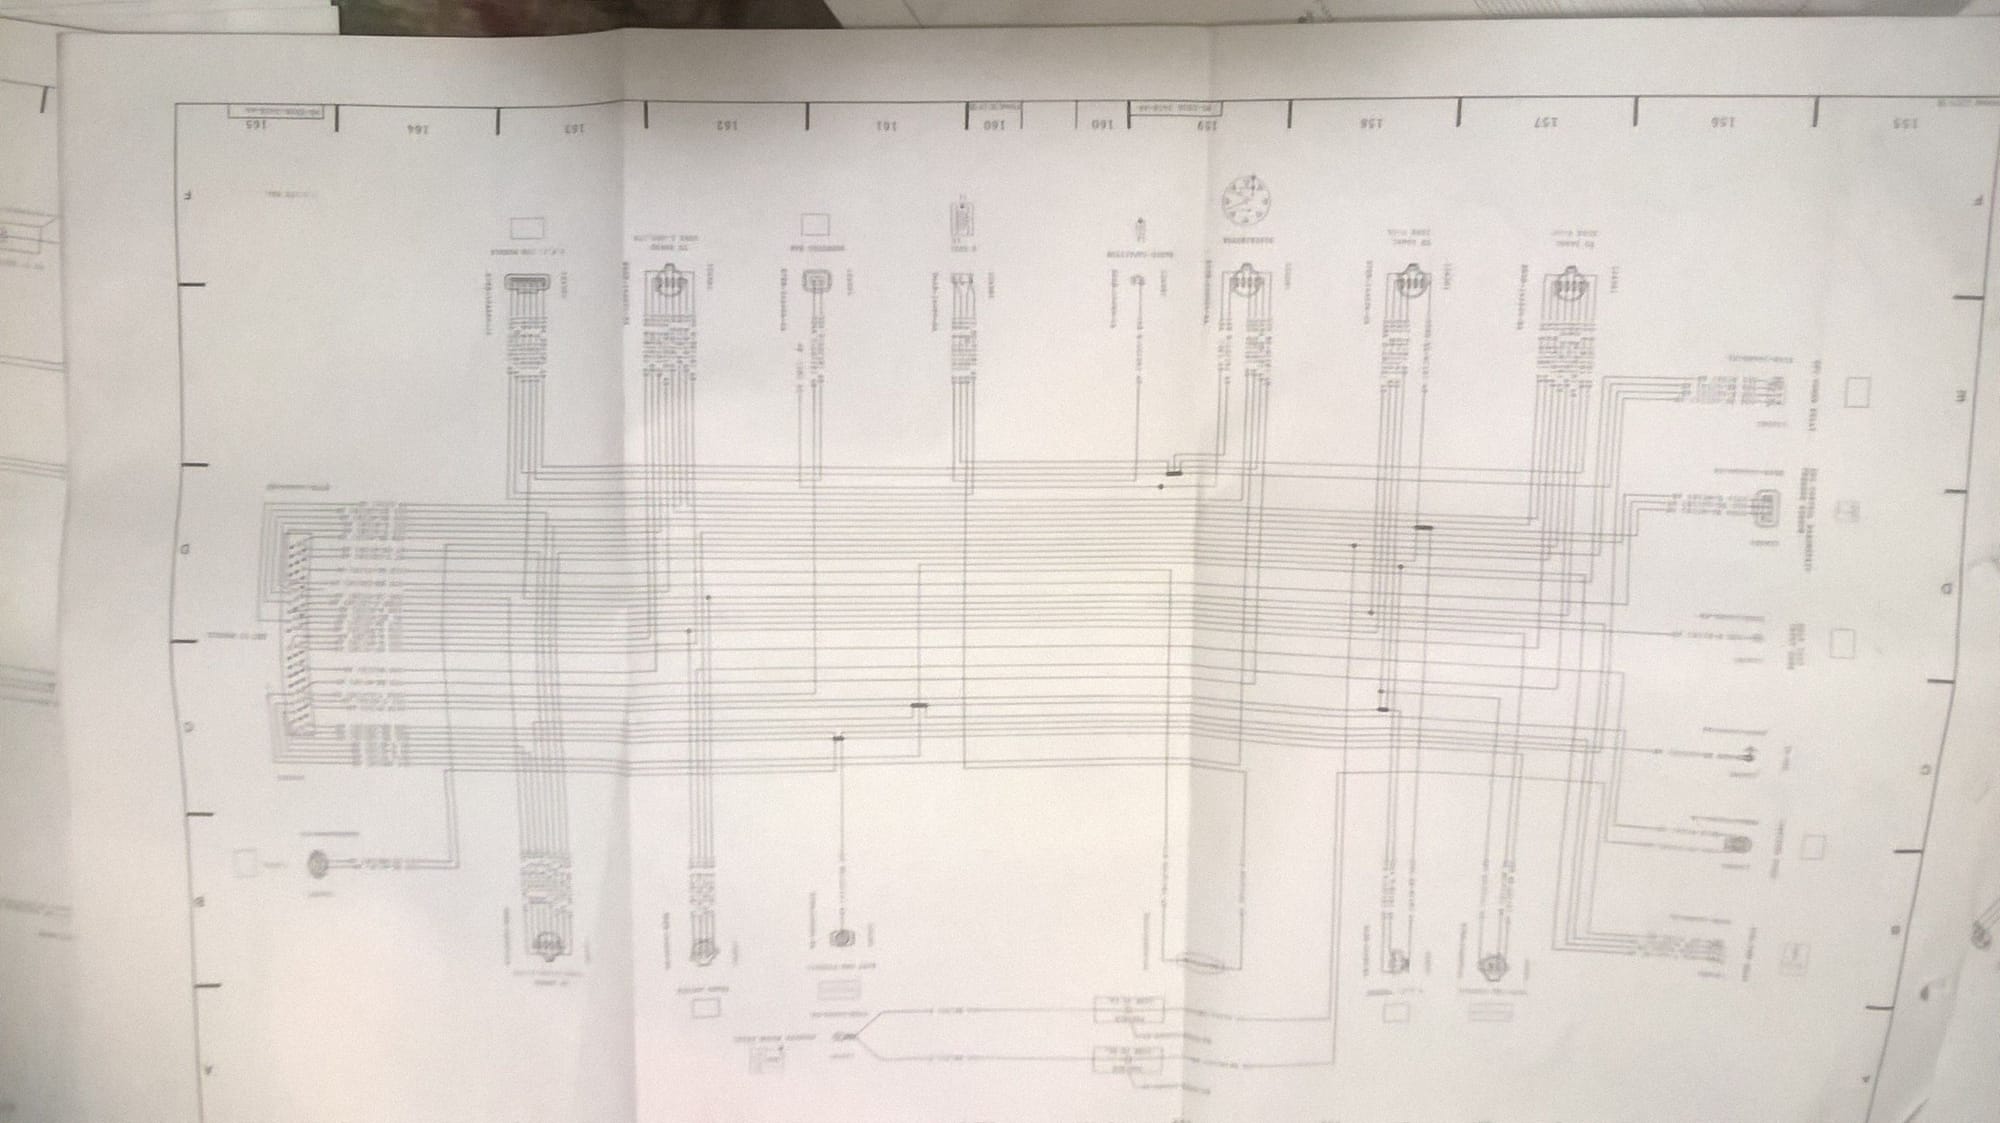 86 ford eec iv pinout diagram